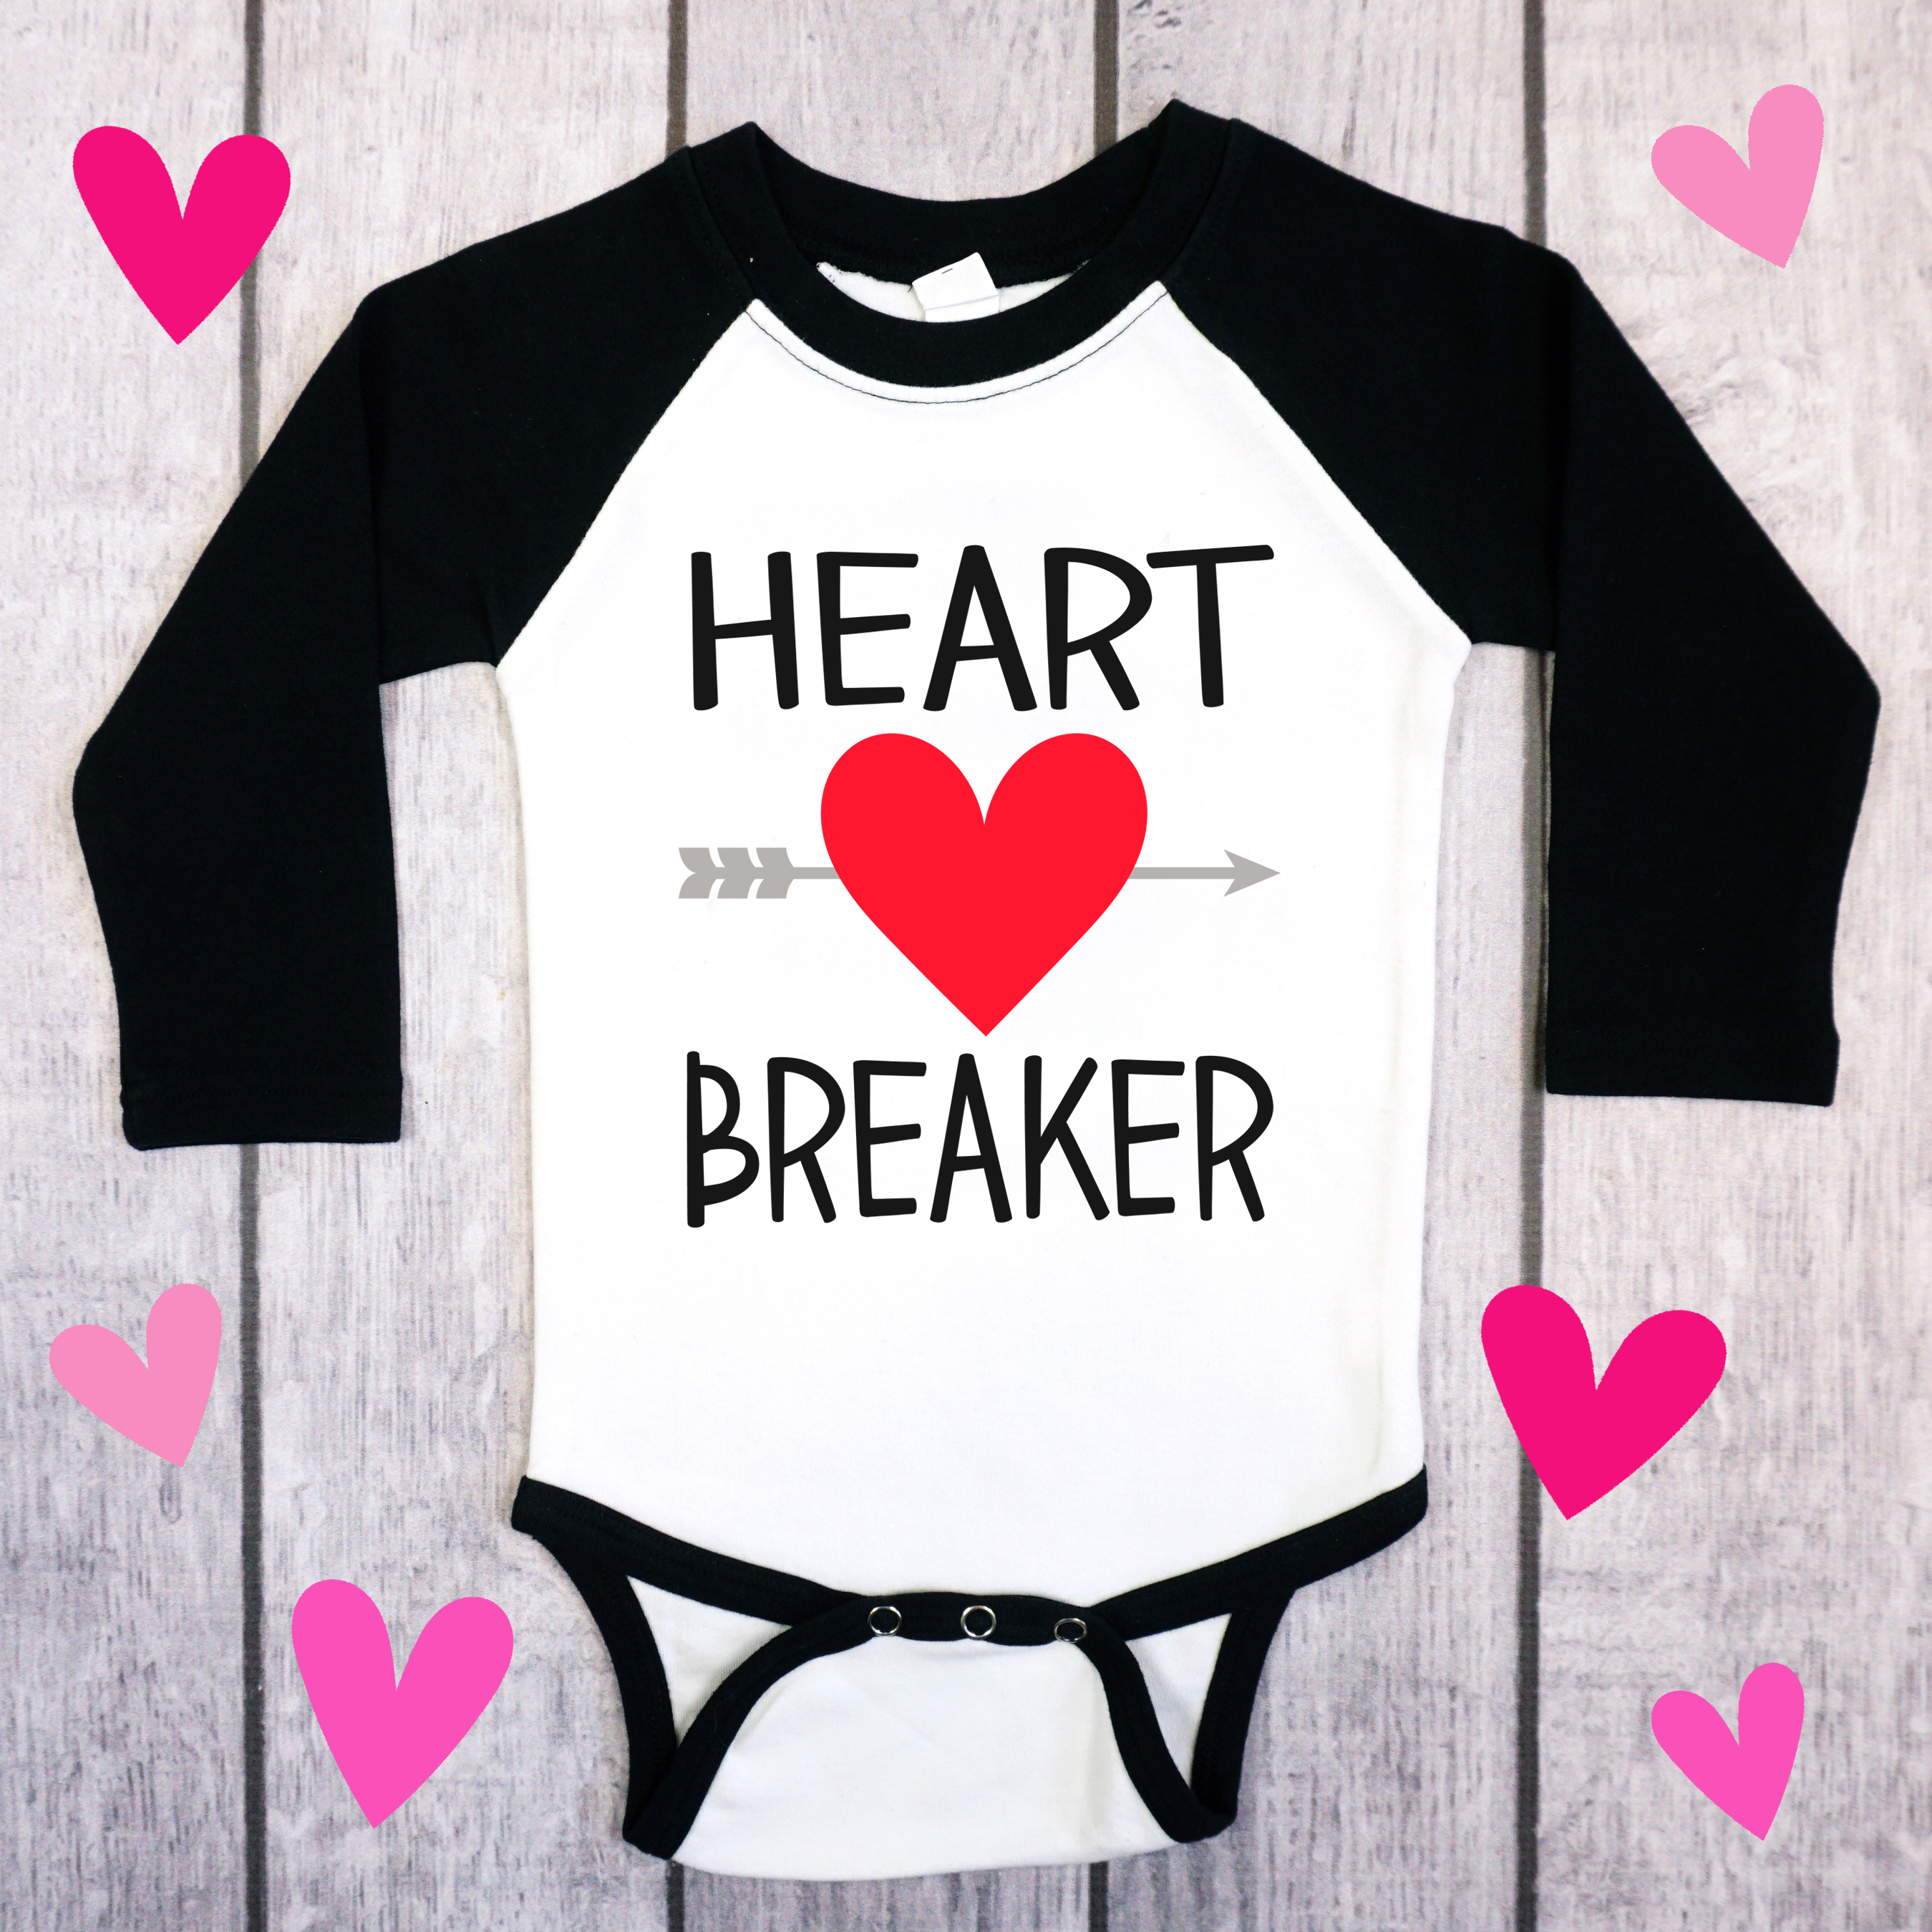 Download FREE Valentine's Day SVGs + Heart Breaker Shirt - Happiness is Homemade